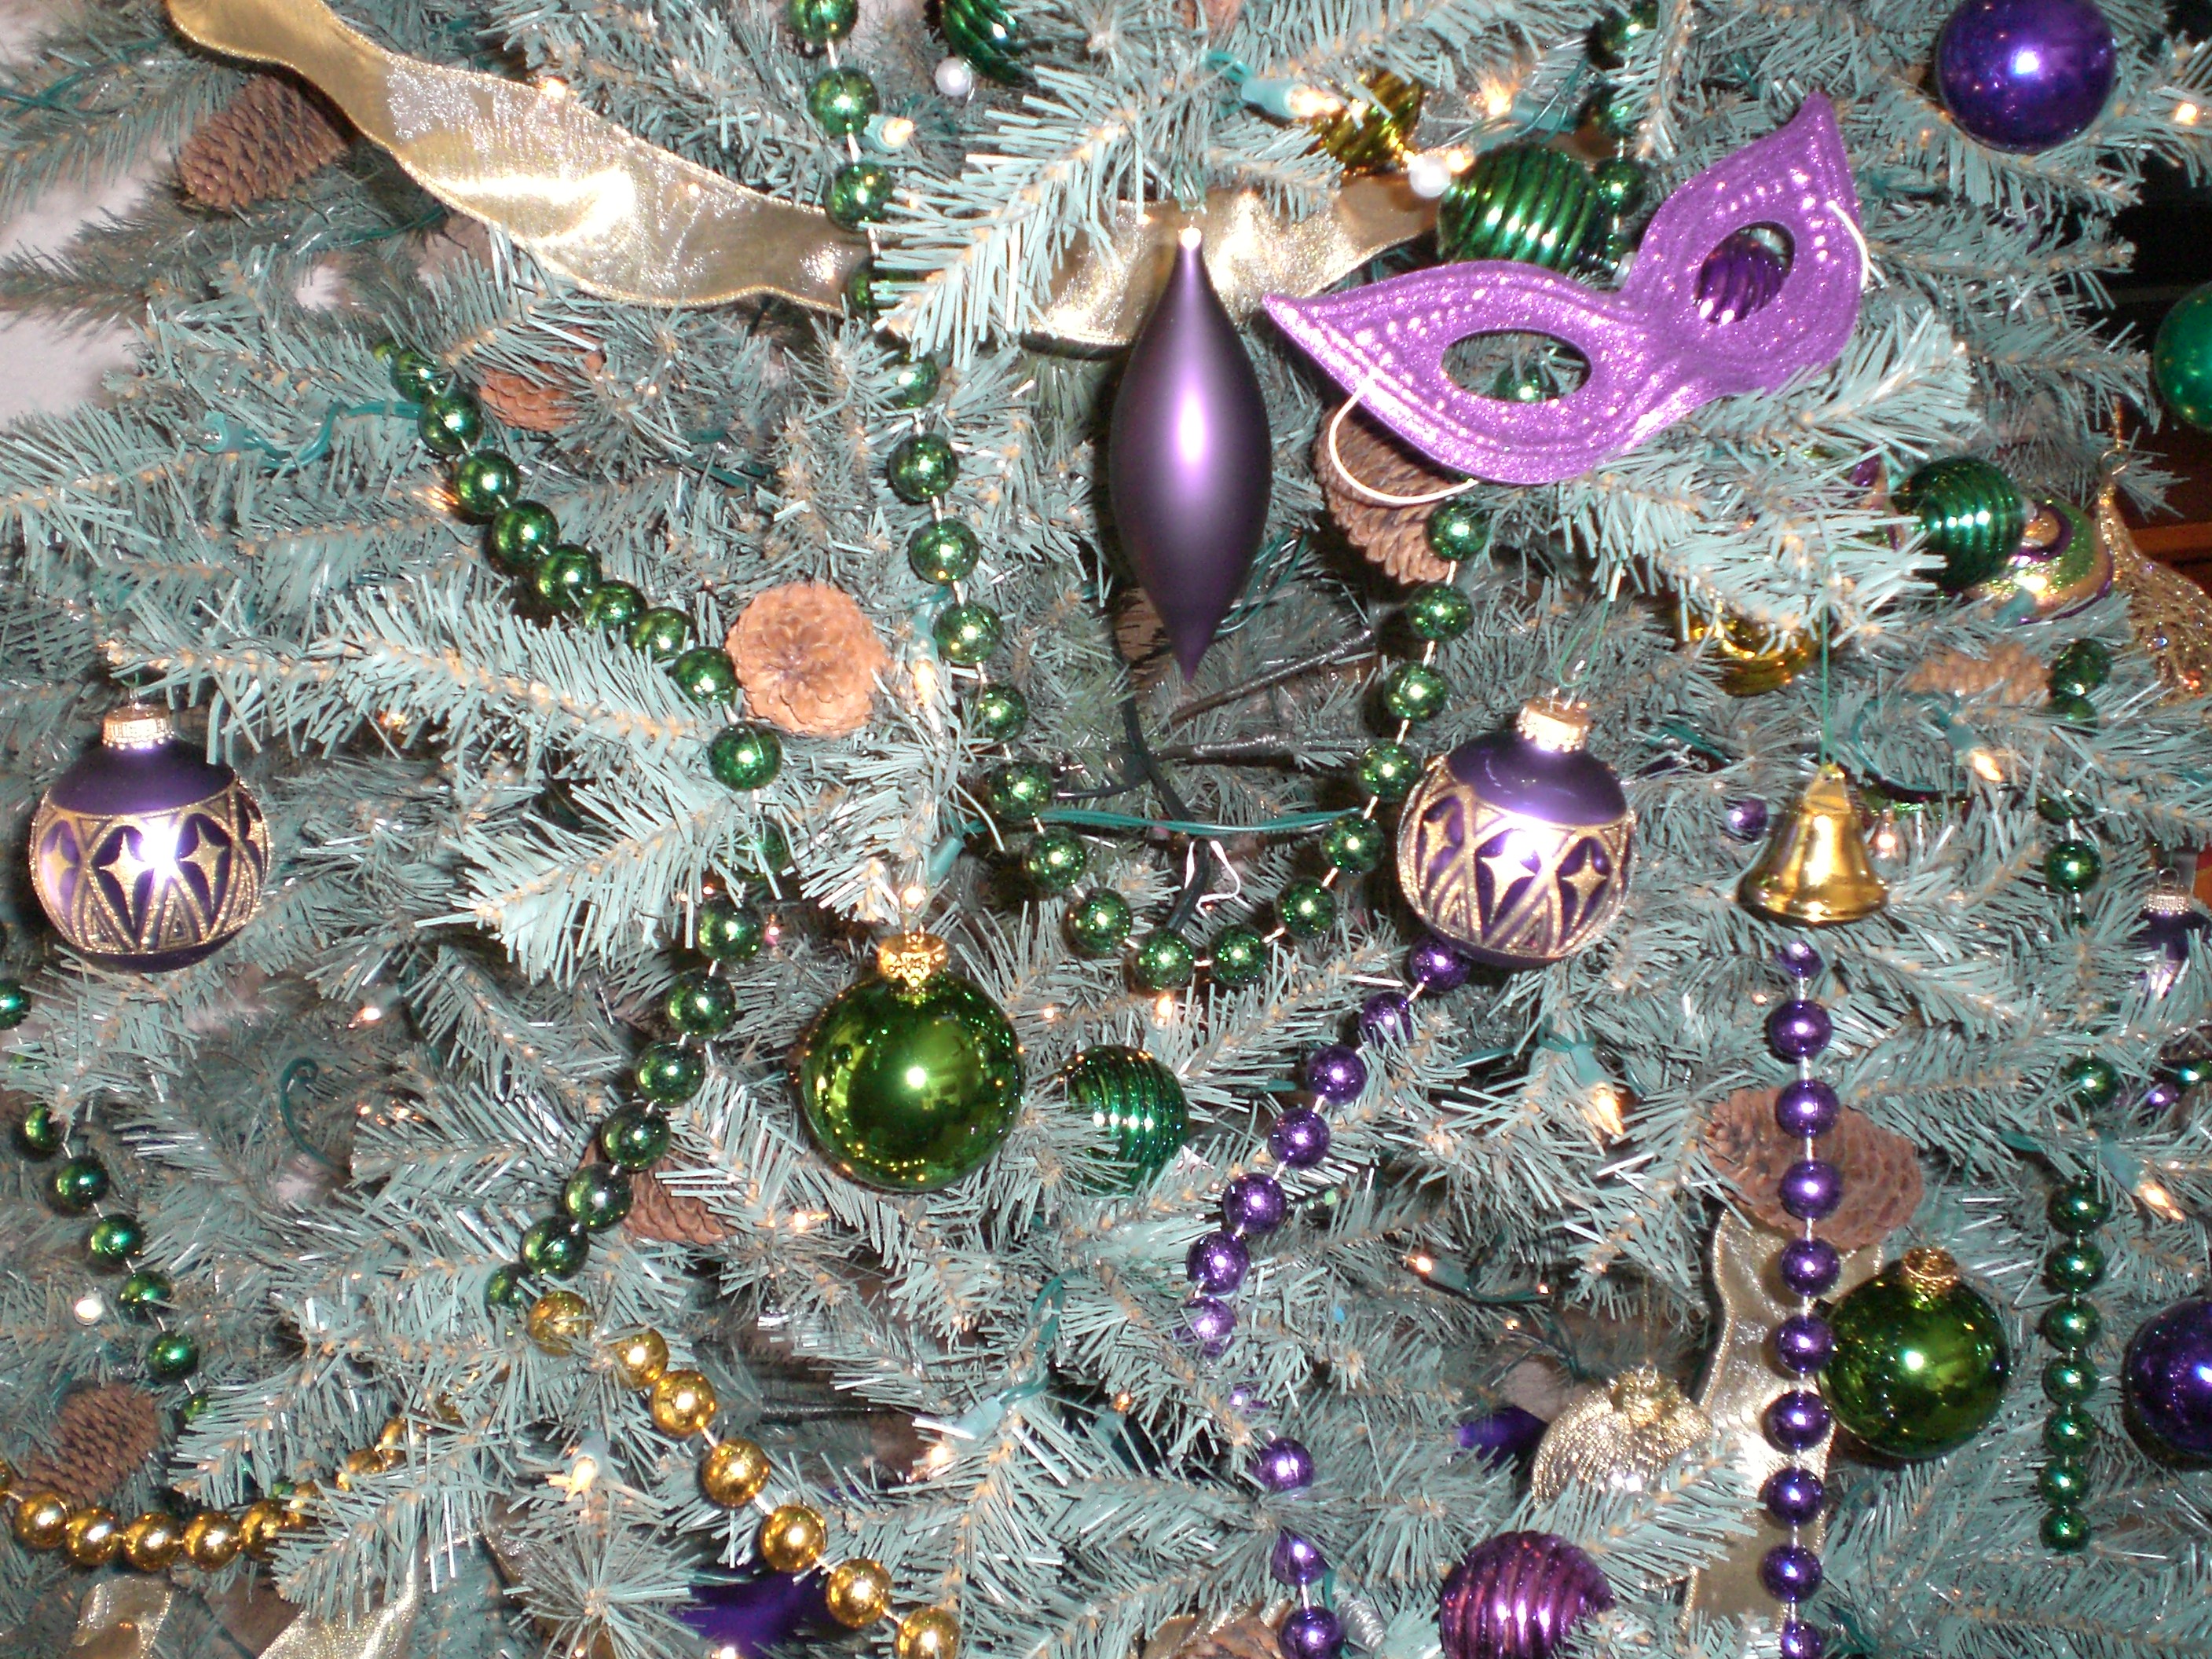 The Mardi Gras Tree (January 2016), Jeff Campbell, Local Writers' Columns, Center for Regional Heritage Research